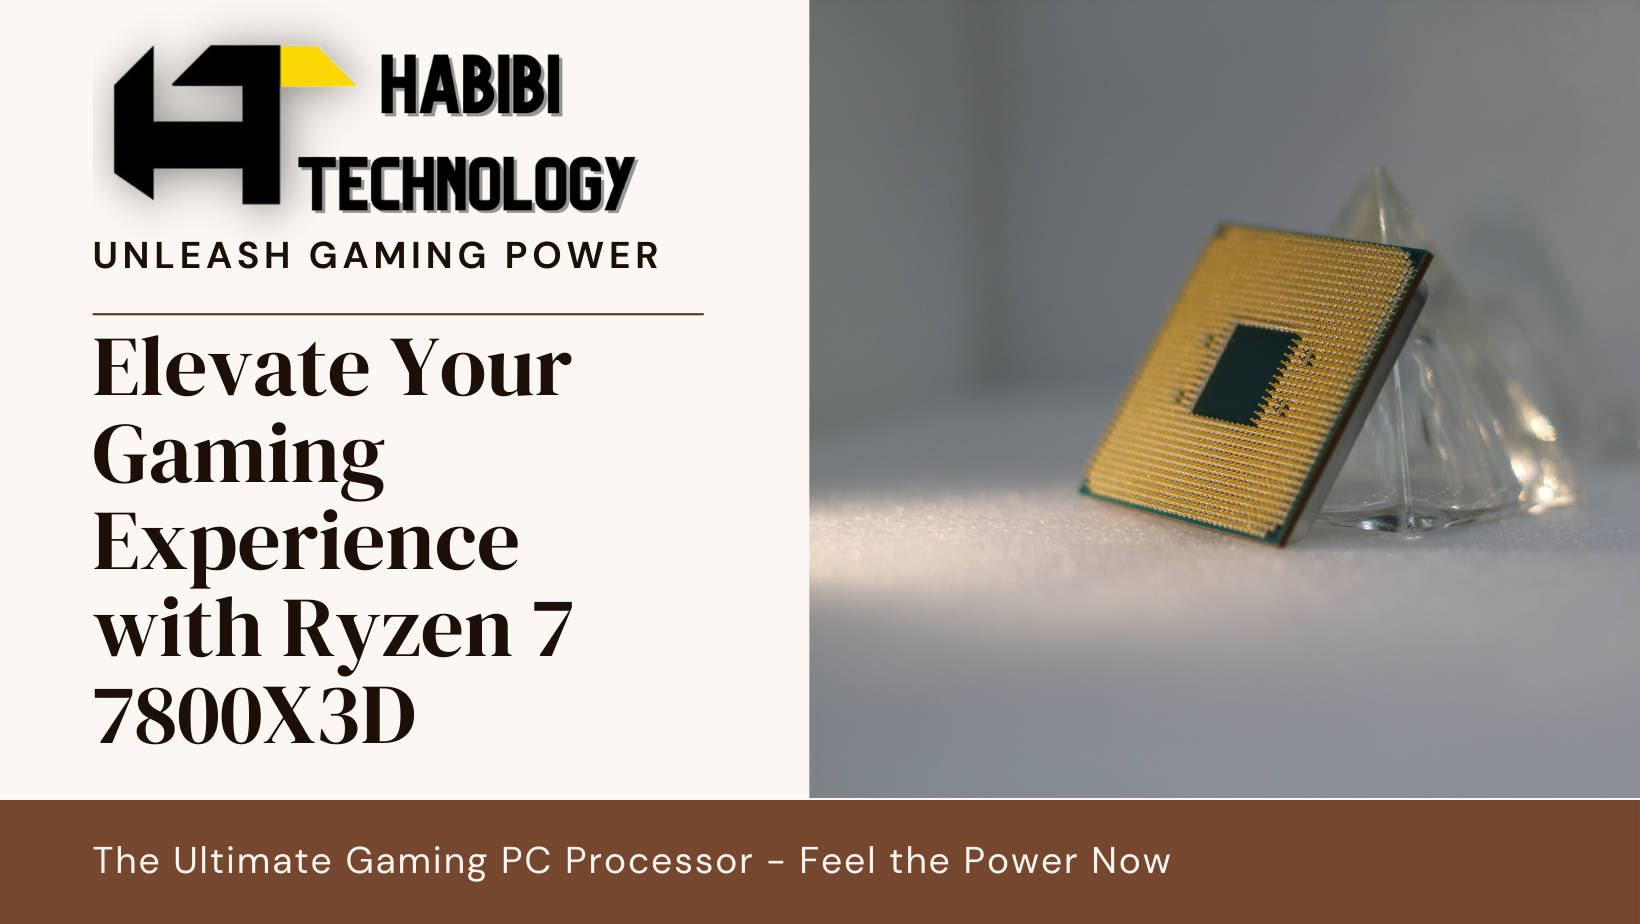 Experience Next-Level Gaming with the AMD Ryzen 7 7800X3D: The Ultimate Gaming PC Processor